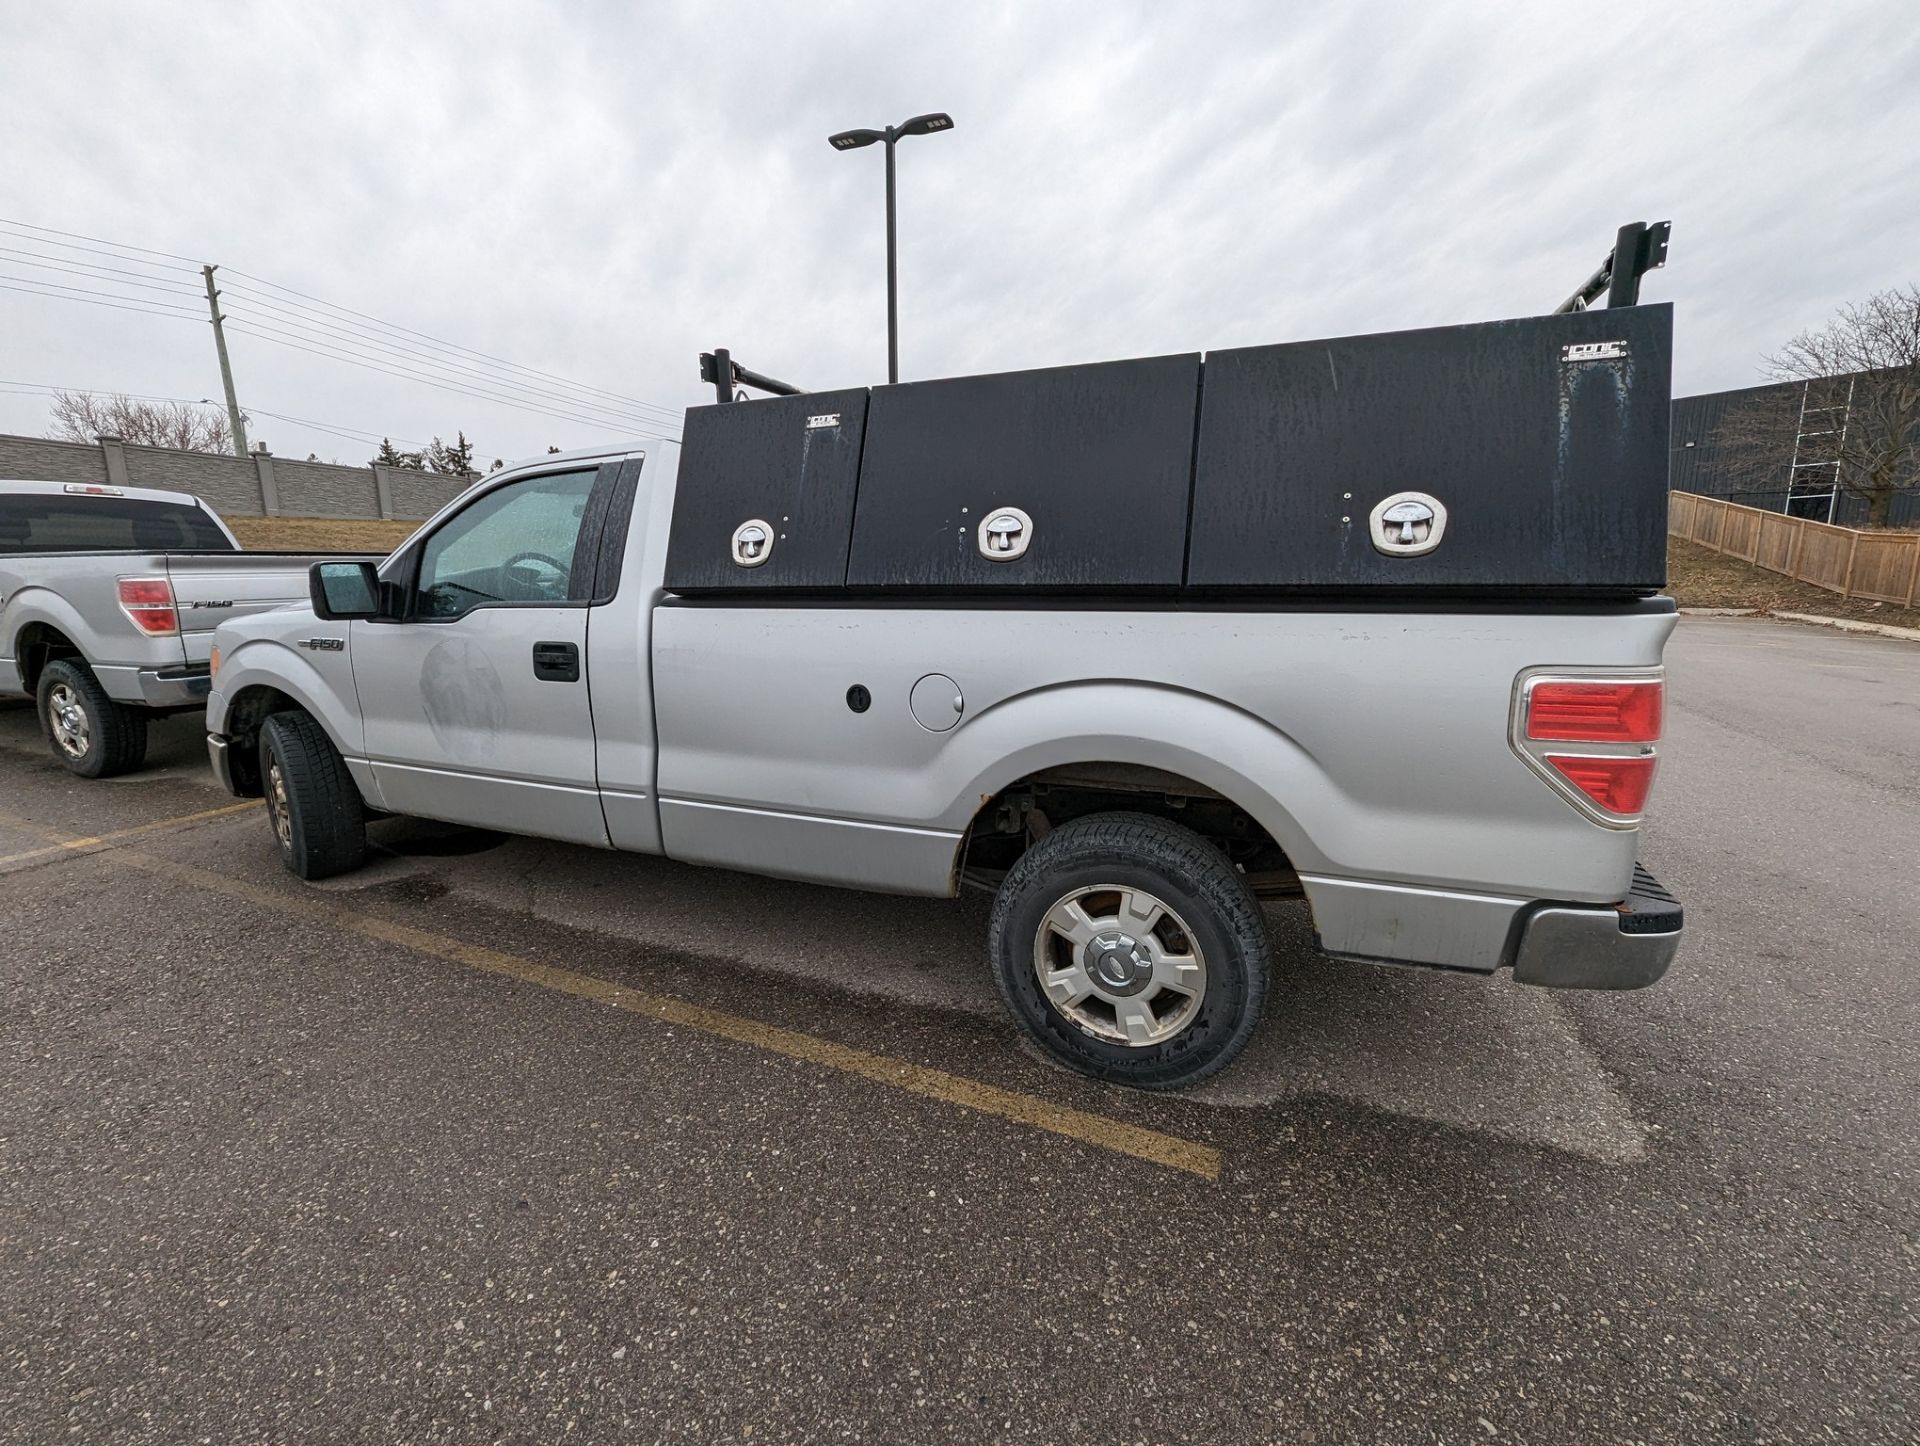 2013 FORD F150 XLT PICKUP TRUCK, VIN# 1FTNF1CF2DKE53797, APPROX. 411,982KMS (NO BLACK TOOL BOXES) - Image 7 of 12